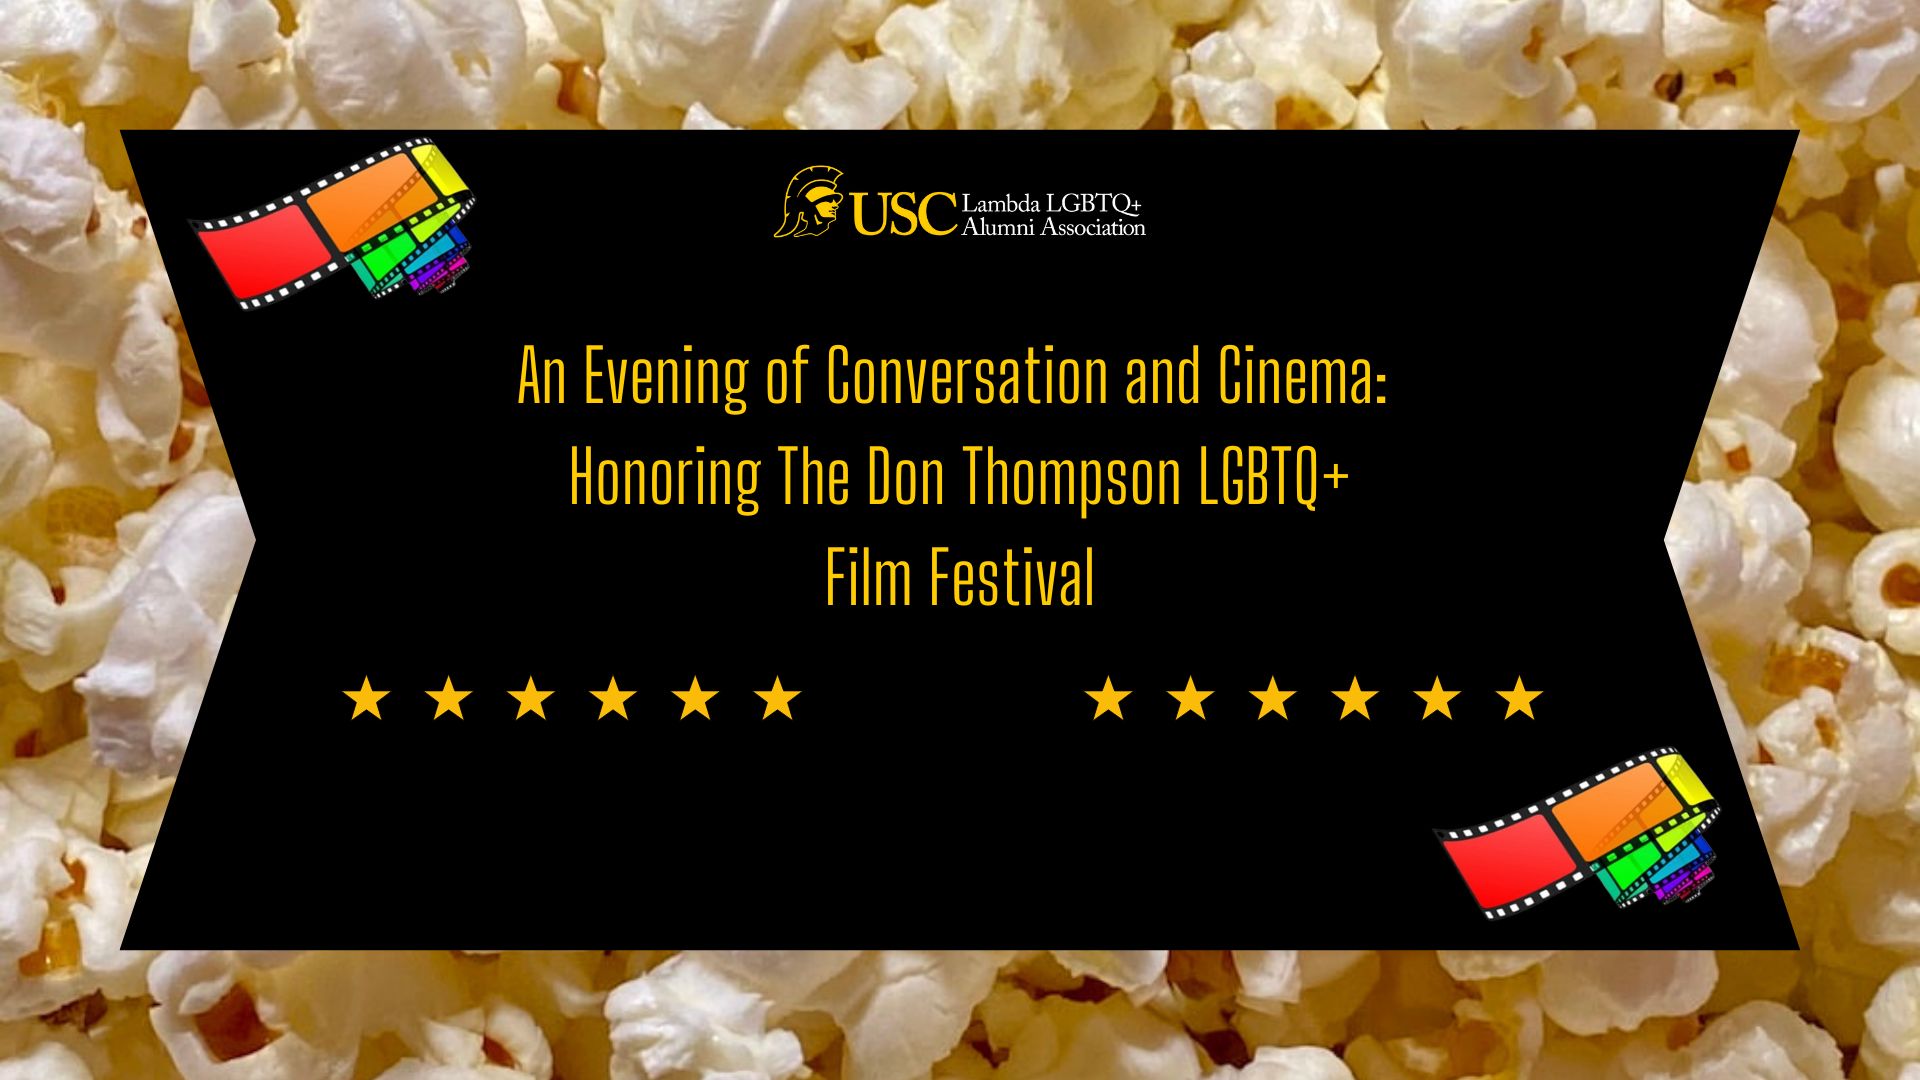 A Night of Pride and Cinema